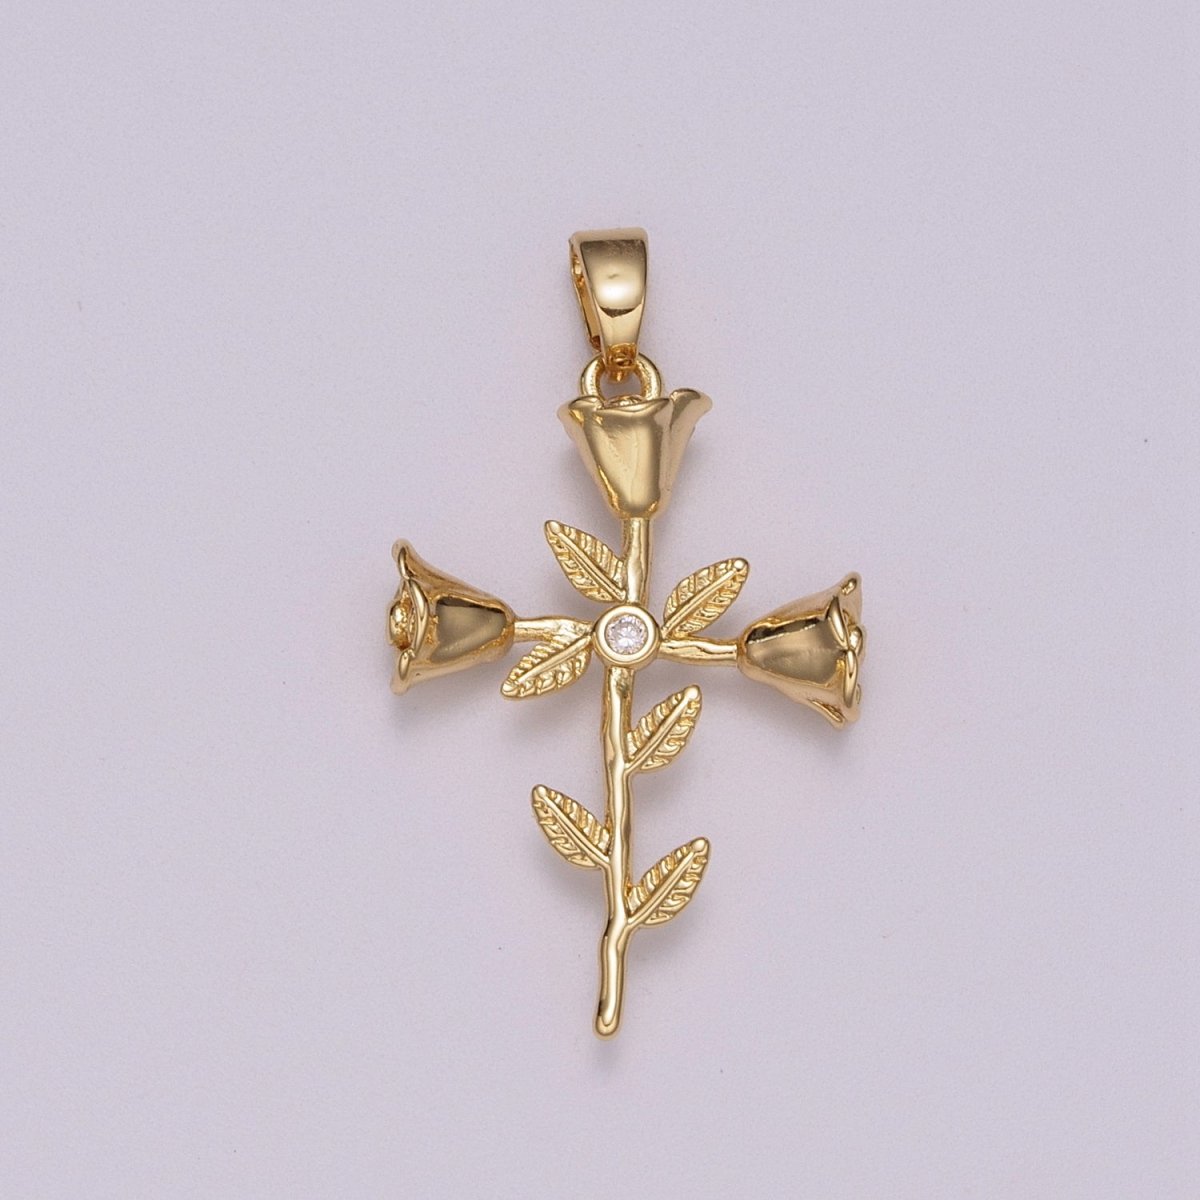 Rose Flowers and Leaves Crucifix Cross Charm 18K Gold Filled Pendant for Necklace Bracelet Earring N-1426 - DLUXCA